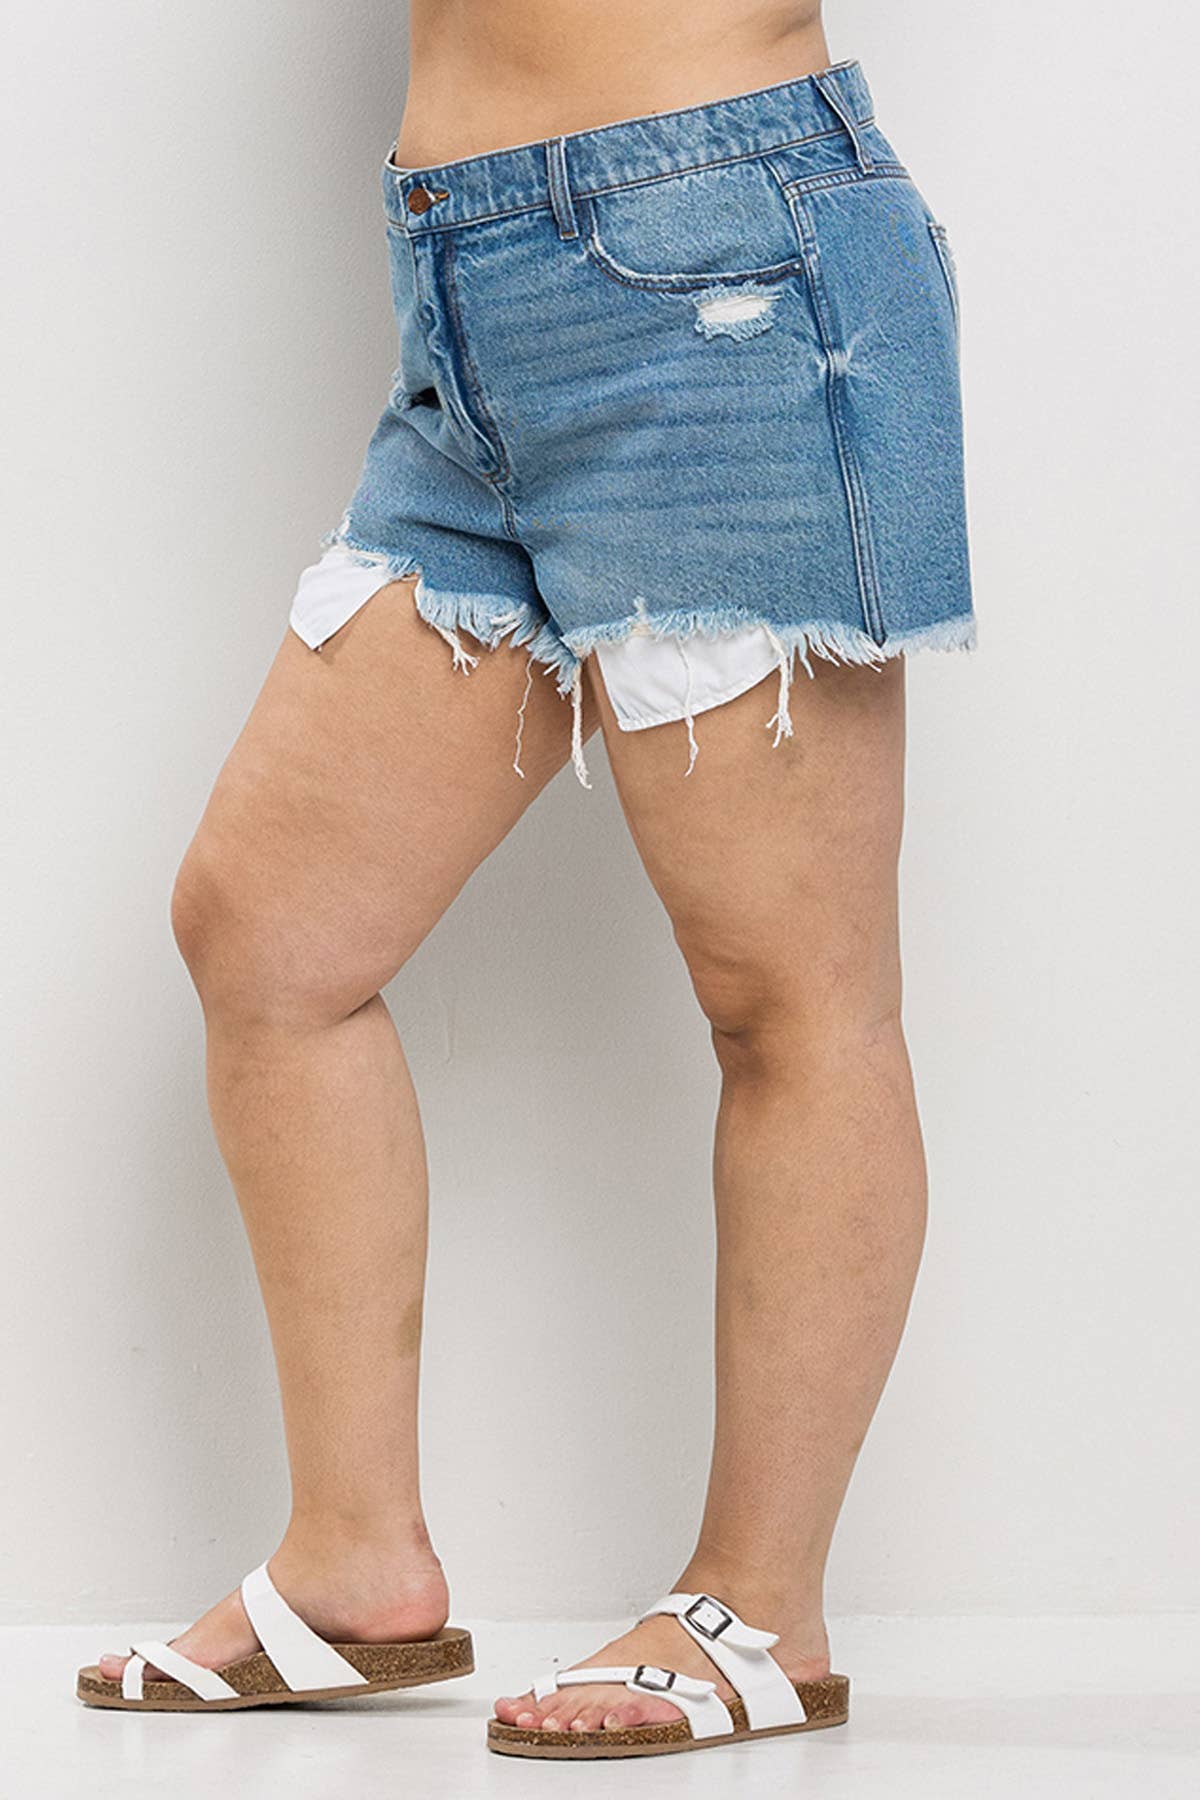 HIGH RISE PLUS SIZE  DENIM SHORTS WITH DISTRESSING, FRAYED HEM, AND VISIBLE POCKETS